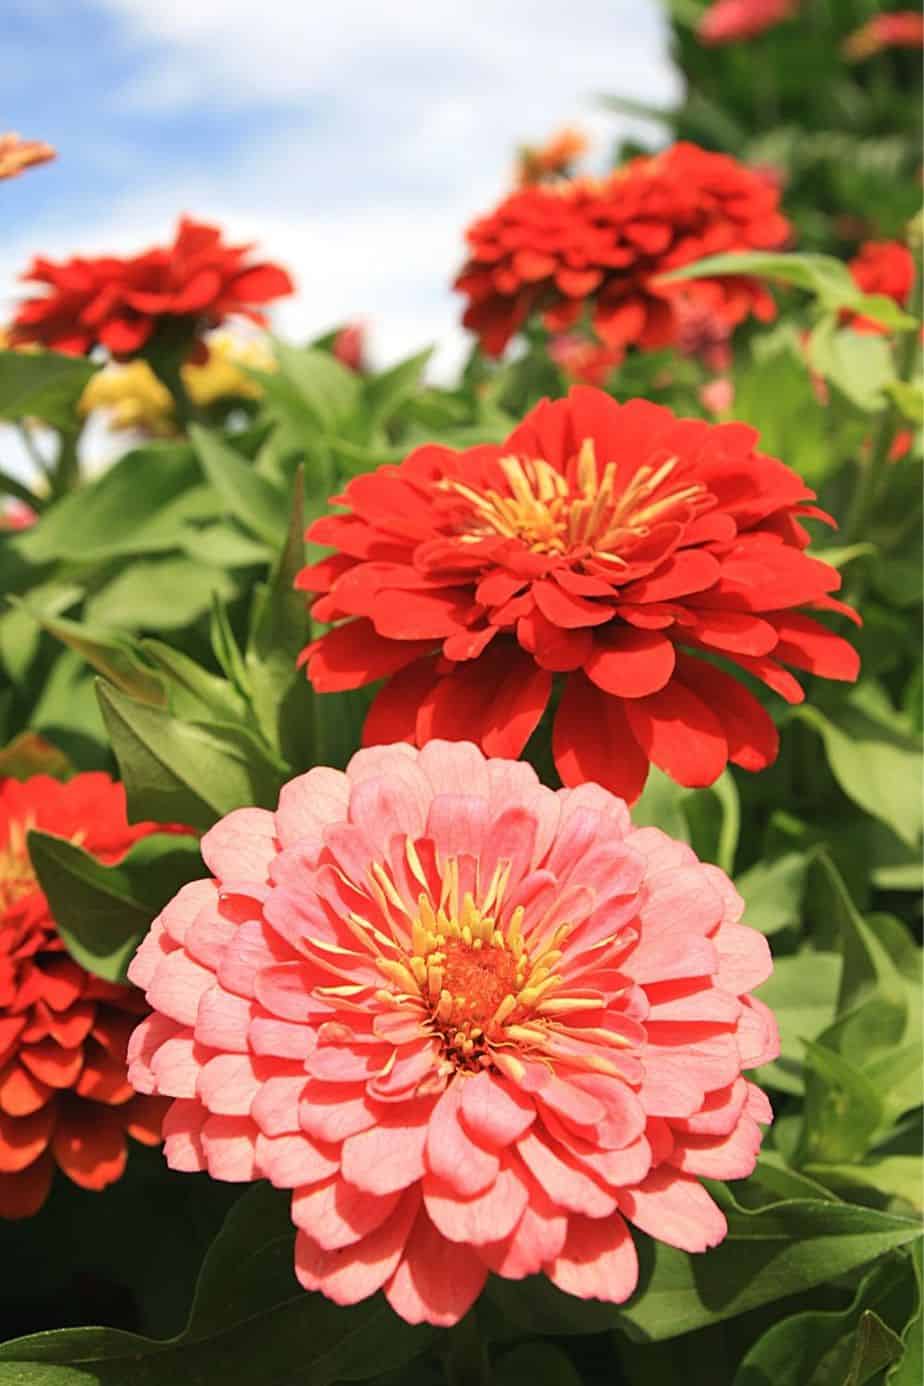 Zinnias are another colorful addition to your west-facing balcony plant collection